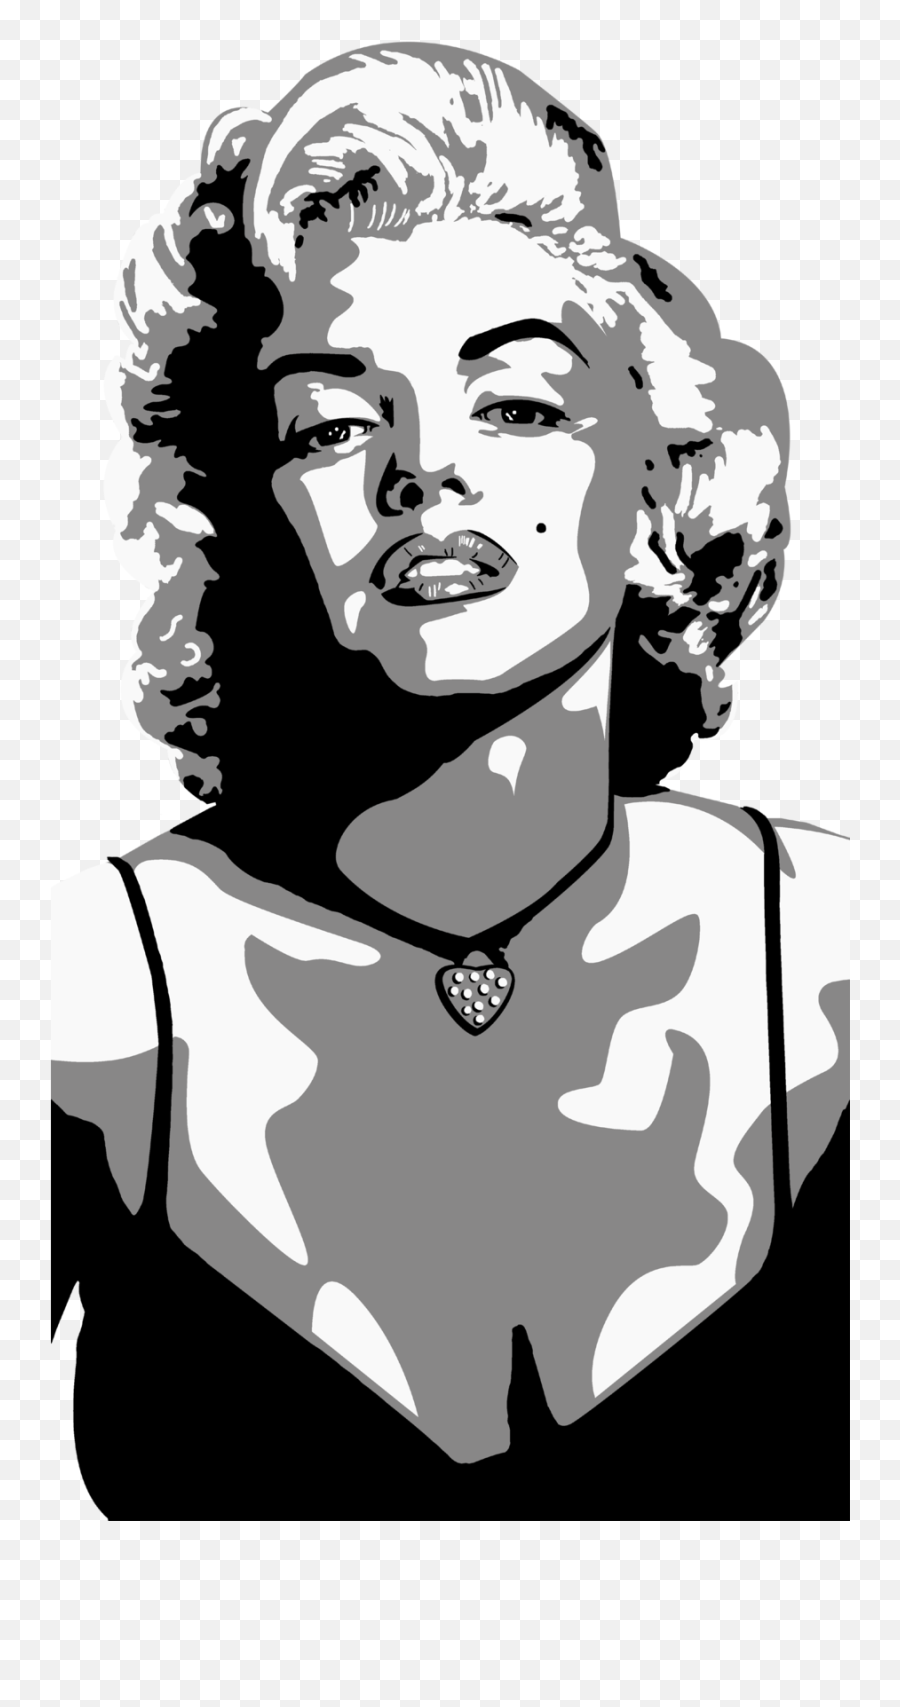 Free Transparent Marilyn Monroe Png - Silhouette Marilyn Monroe Stencil Emoji,Marilyn Monroe Clipart